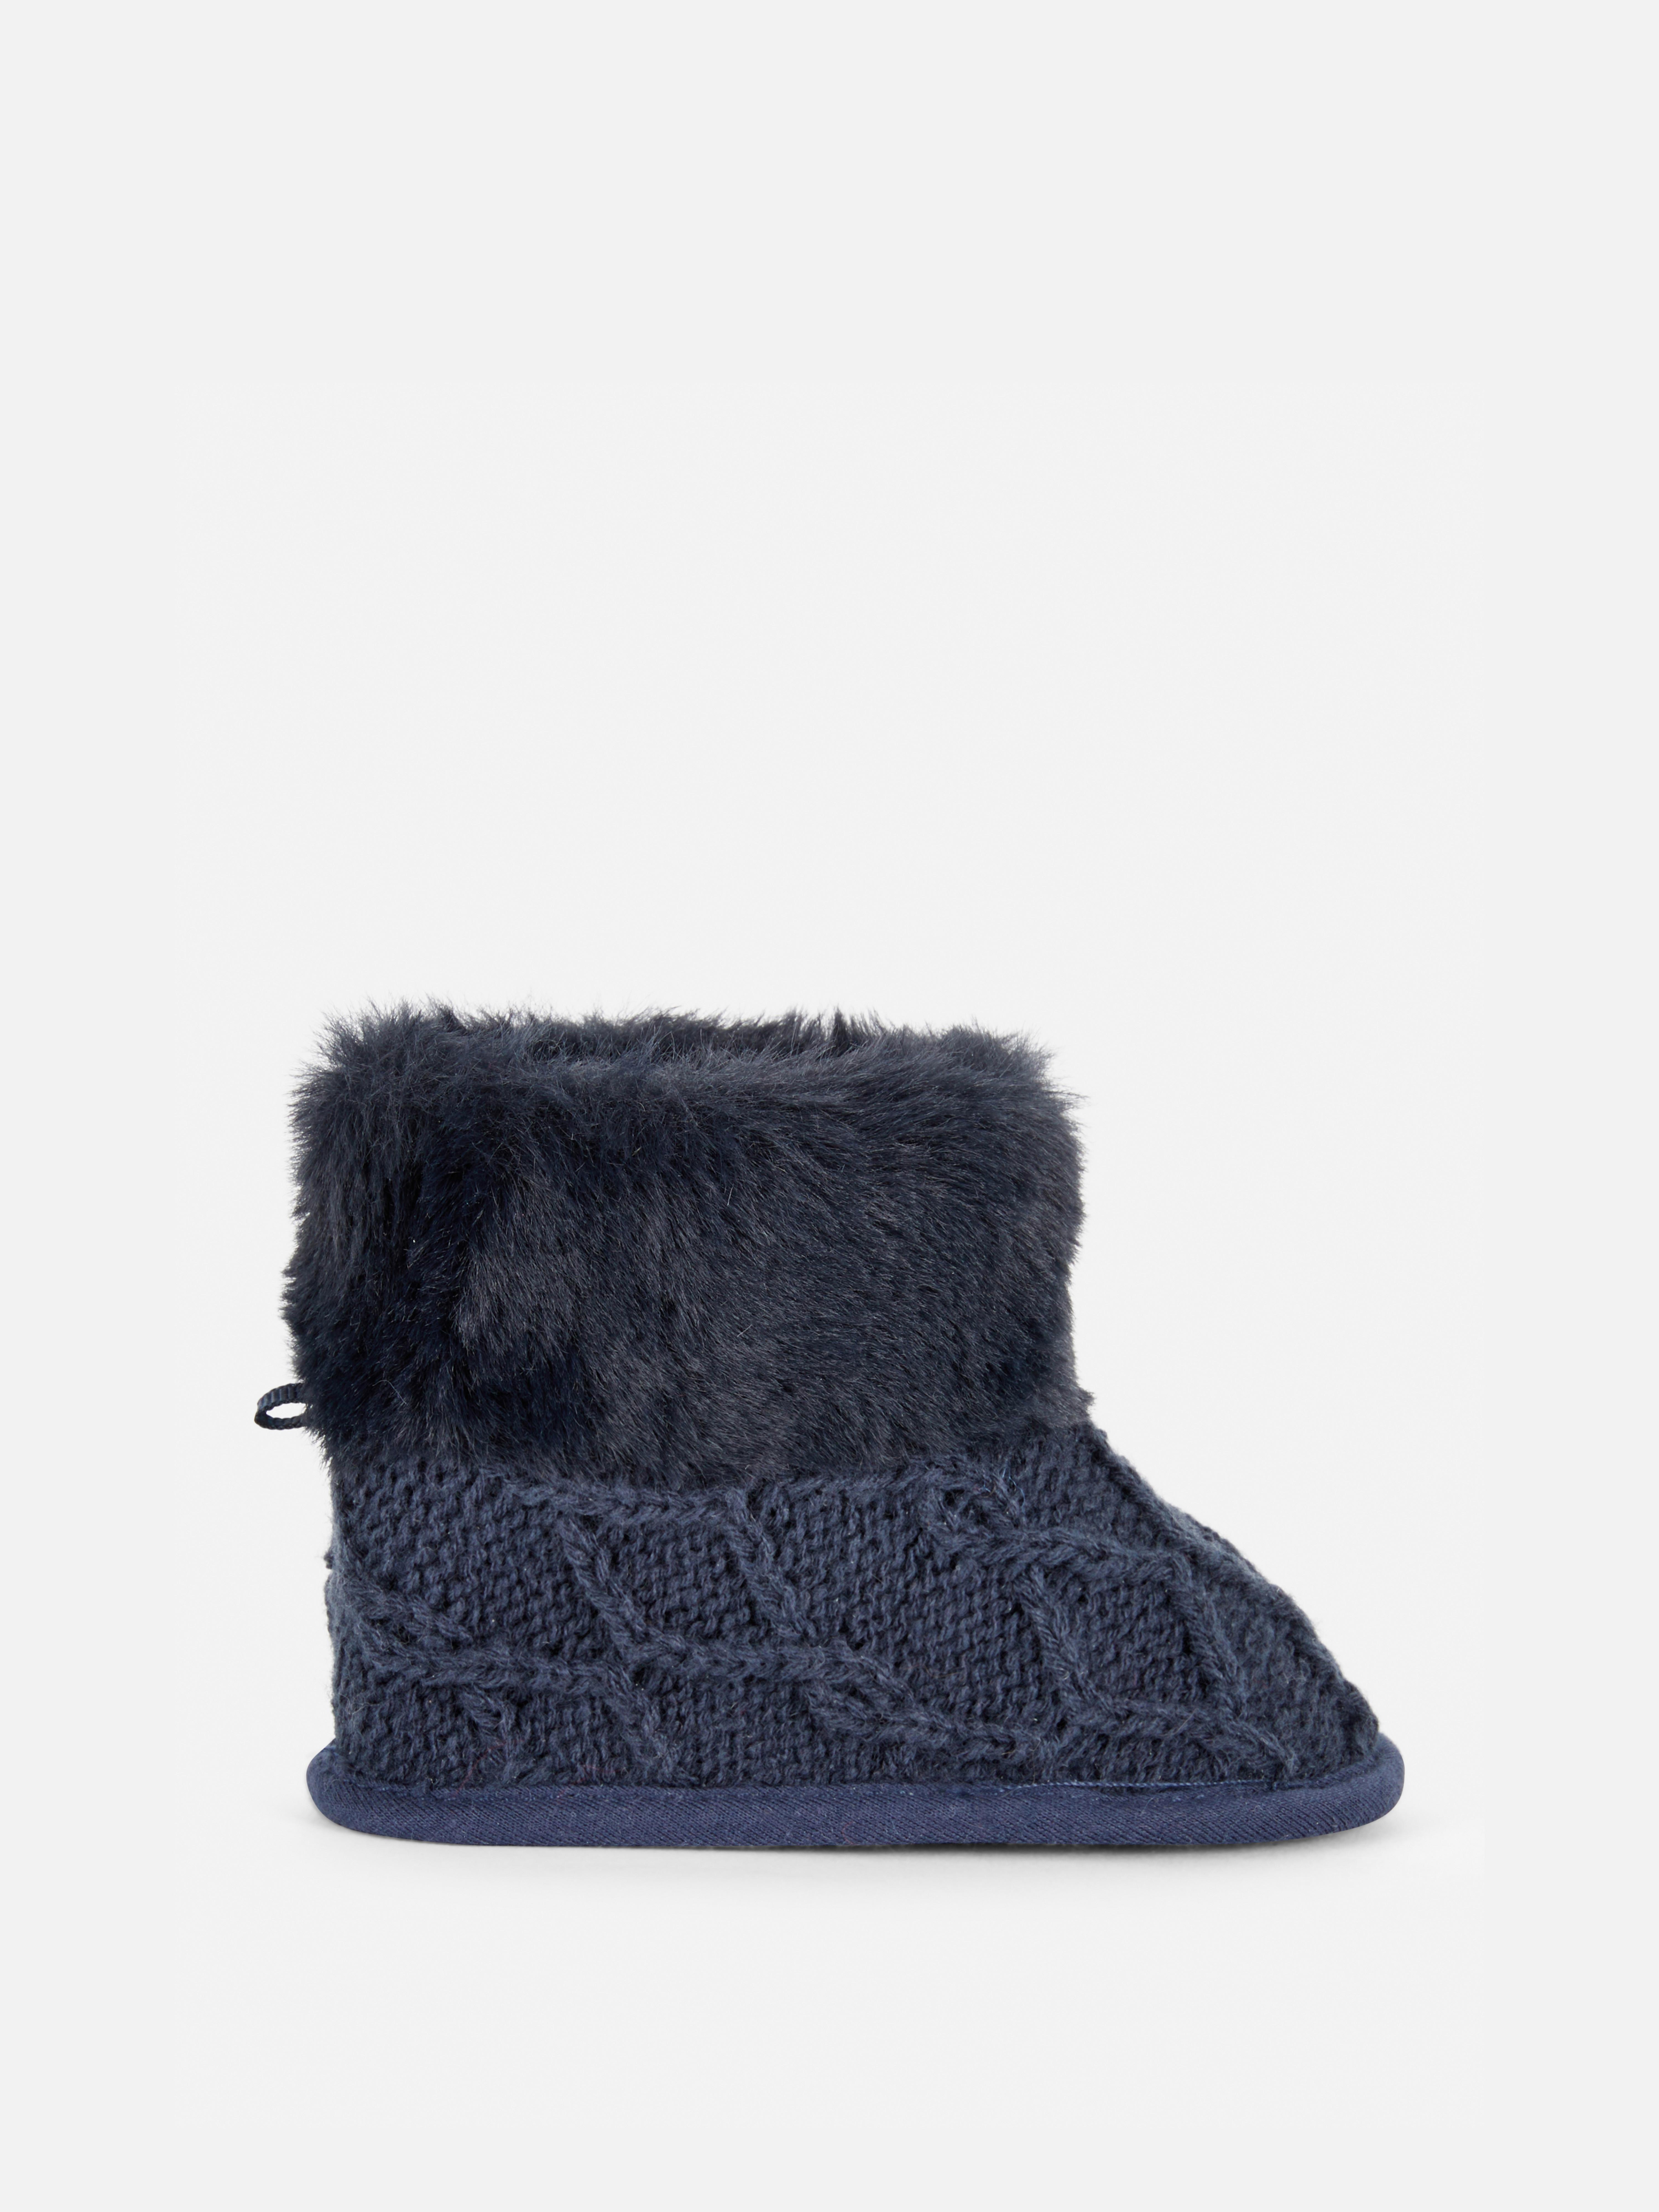 Cable Knit Faux Fur Bootie Slippers Navy